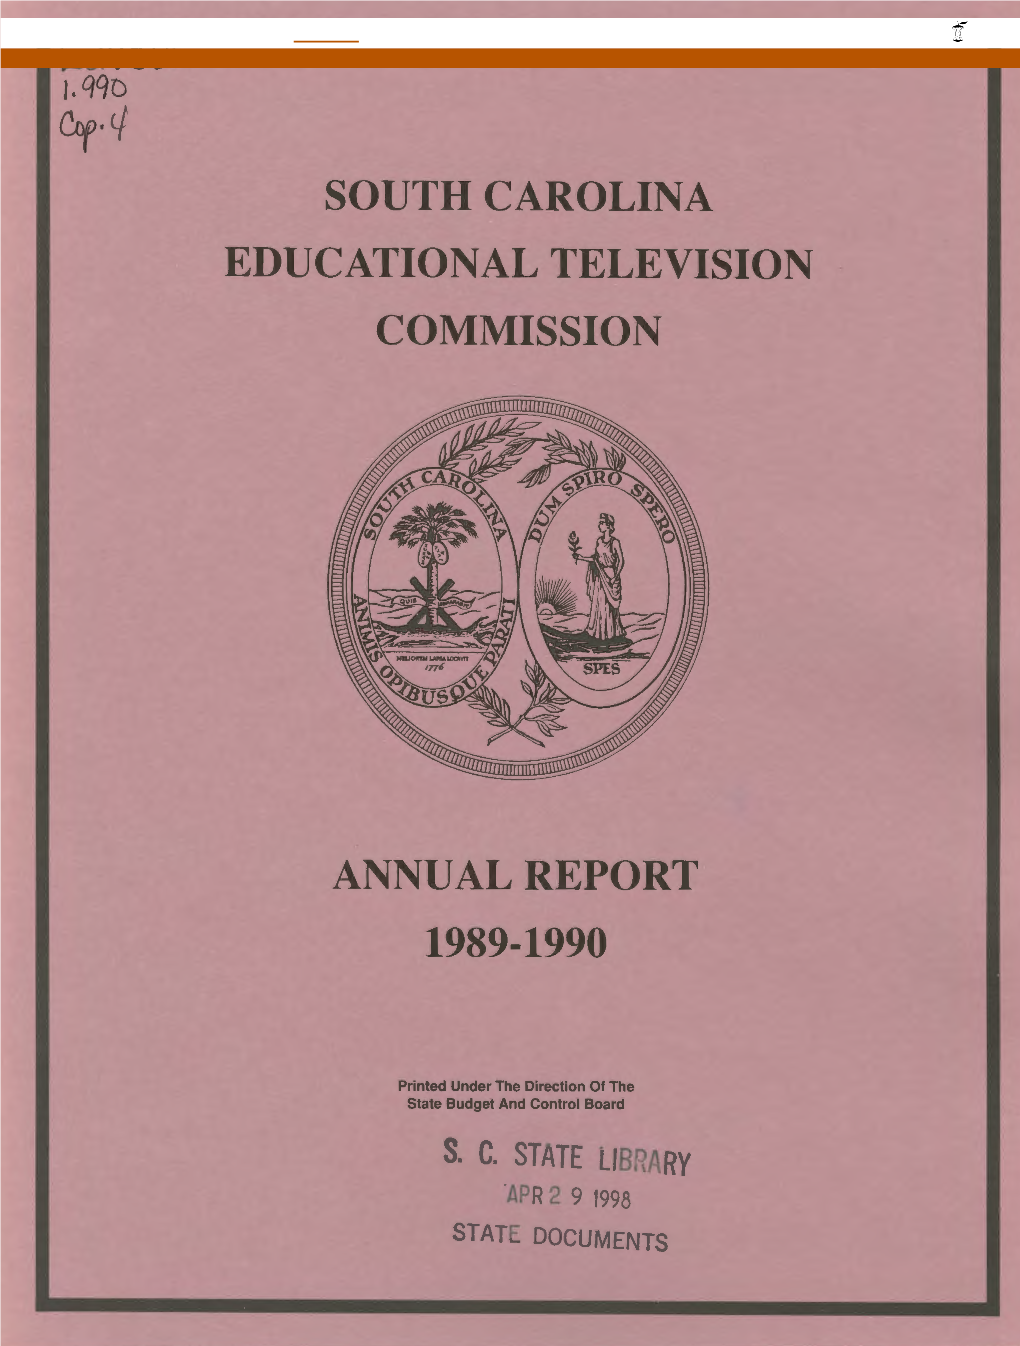 South Carolina Educational Television Commission Annual Report 1989-1990